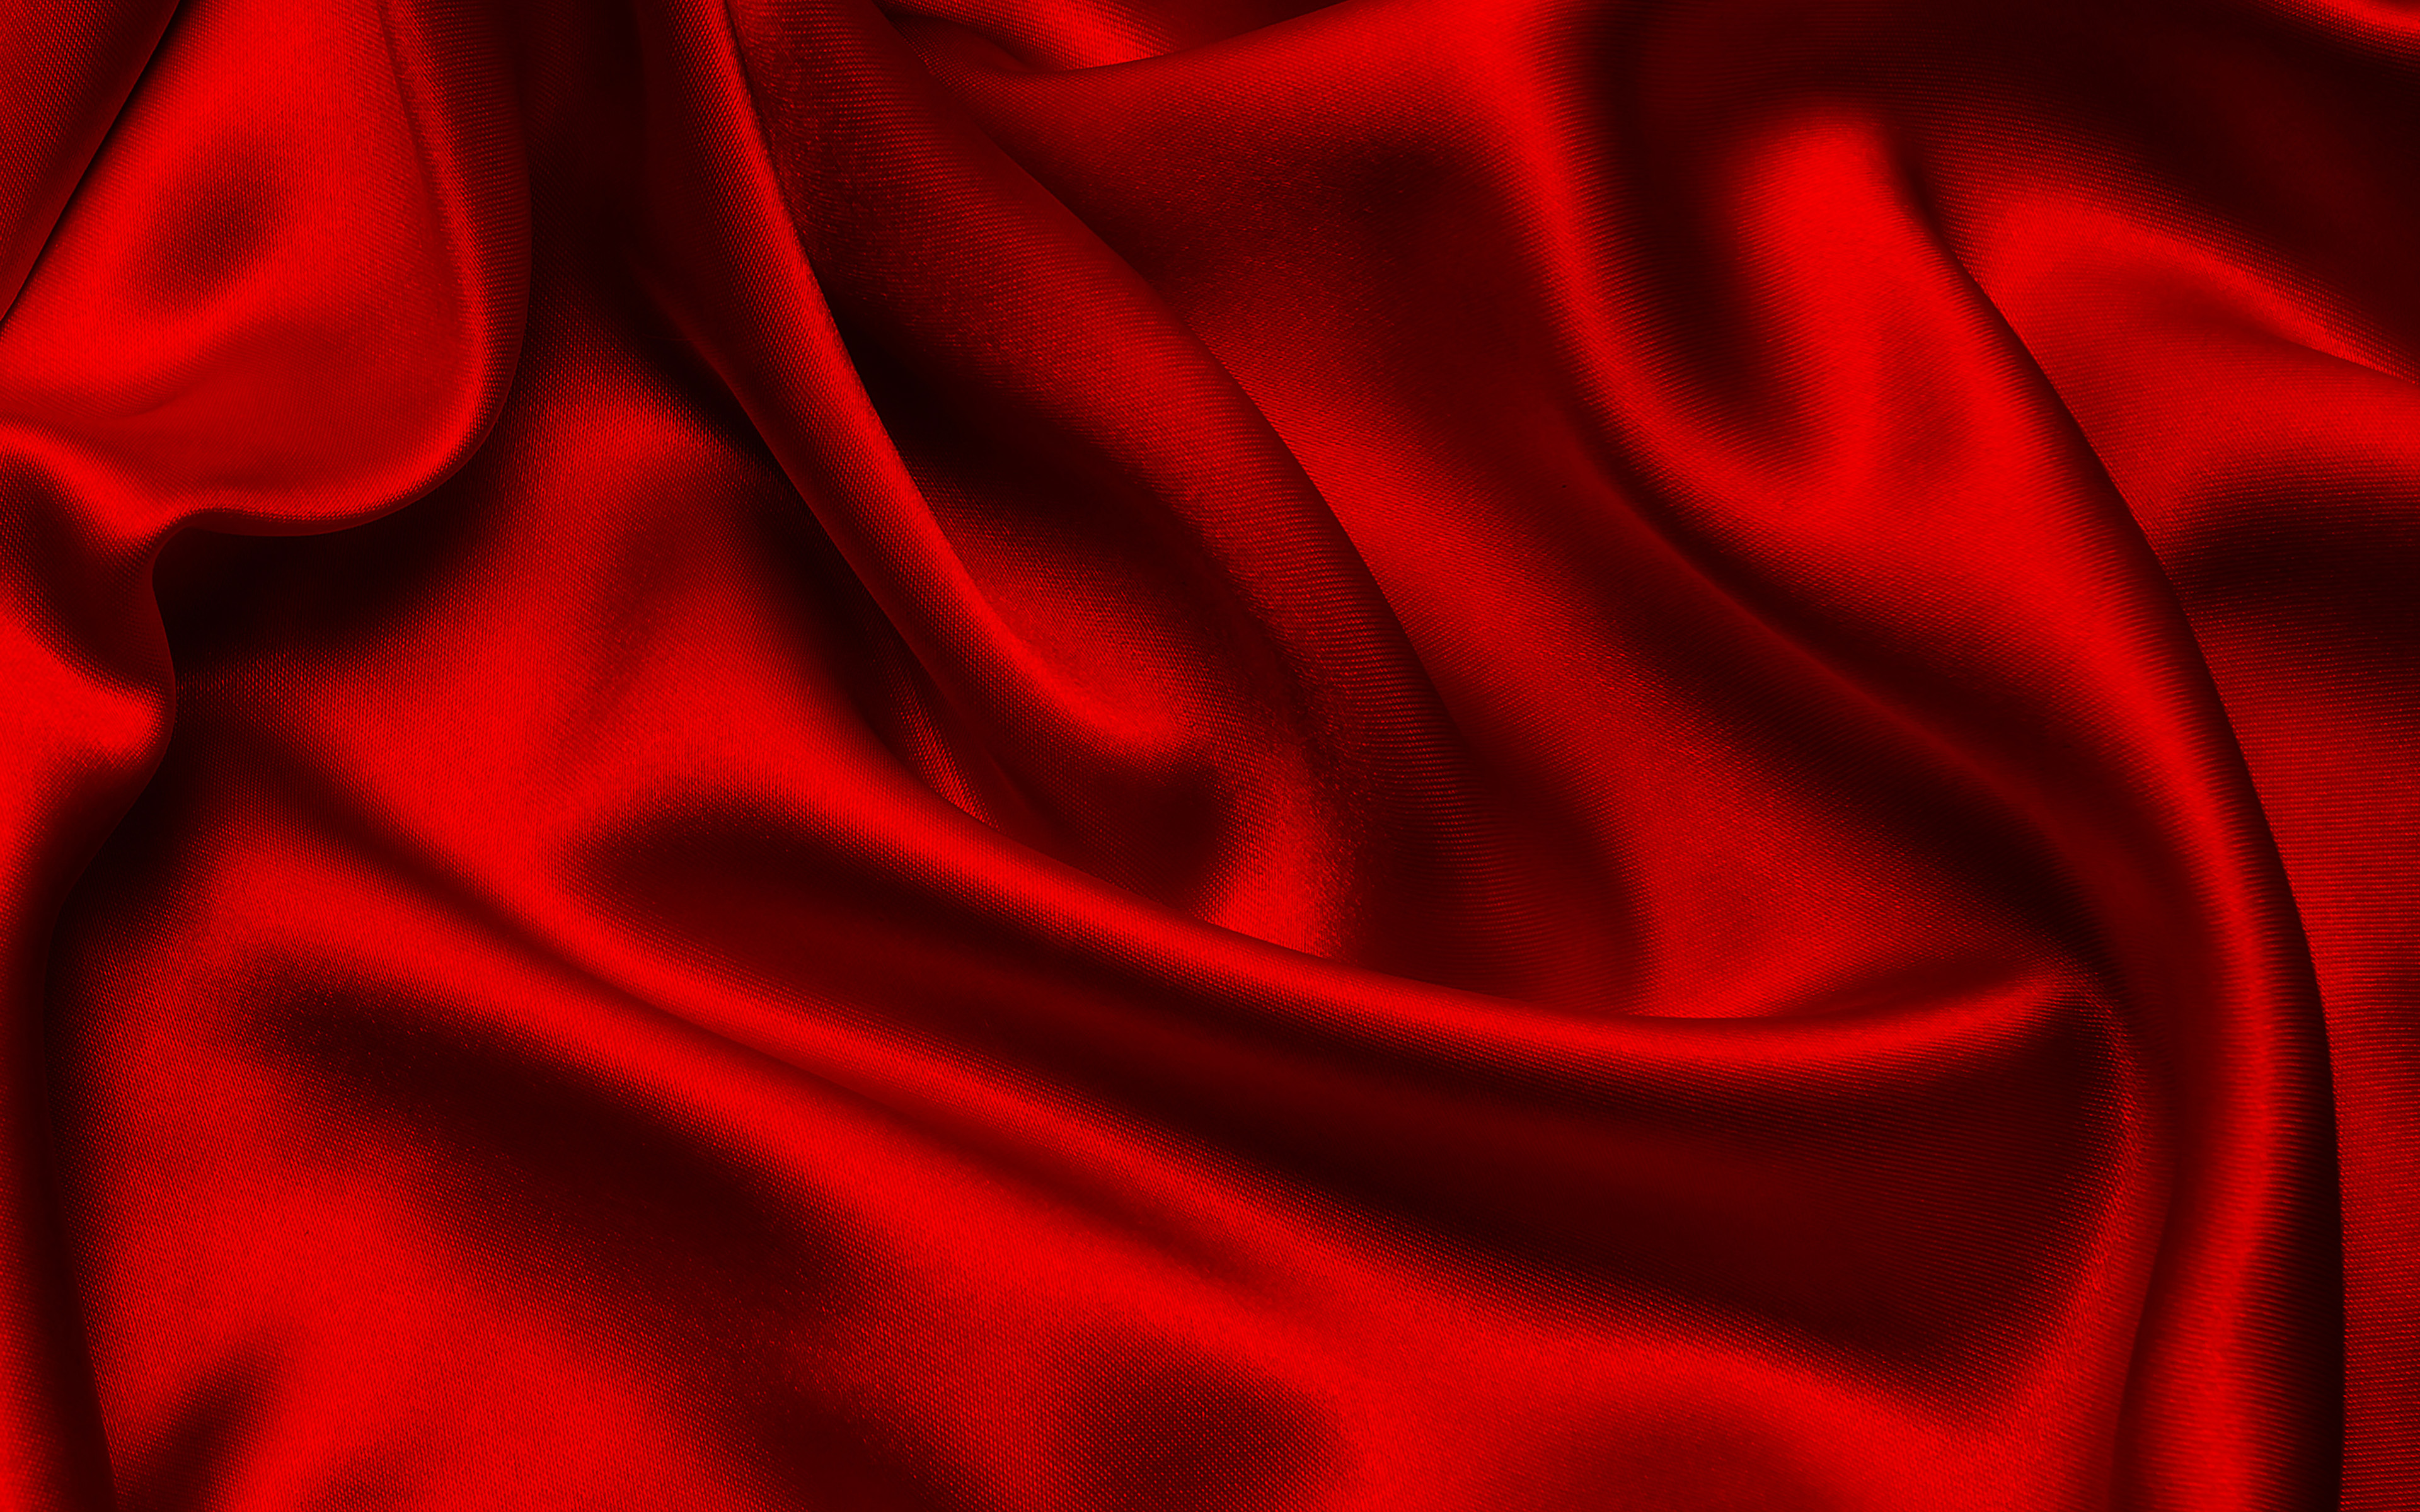 Download wallpaper 4k, red silk, fabric texture, silk, red background, satin, red fabric texture, red satin for desktop with resolution 3840x2400. High Quality HD picture wallpaper